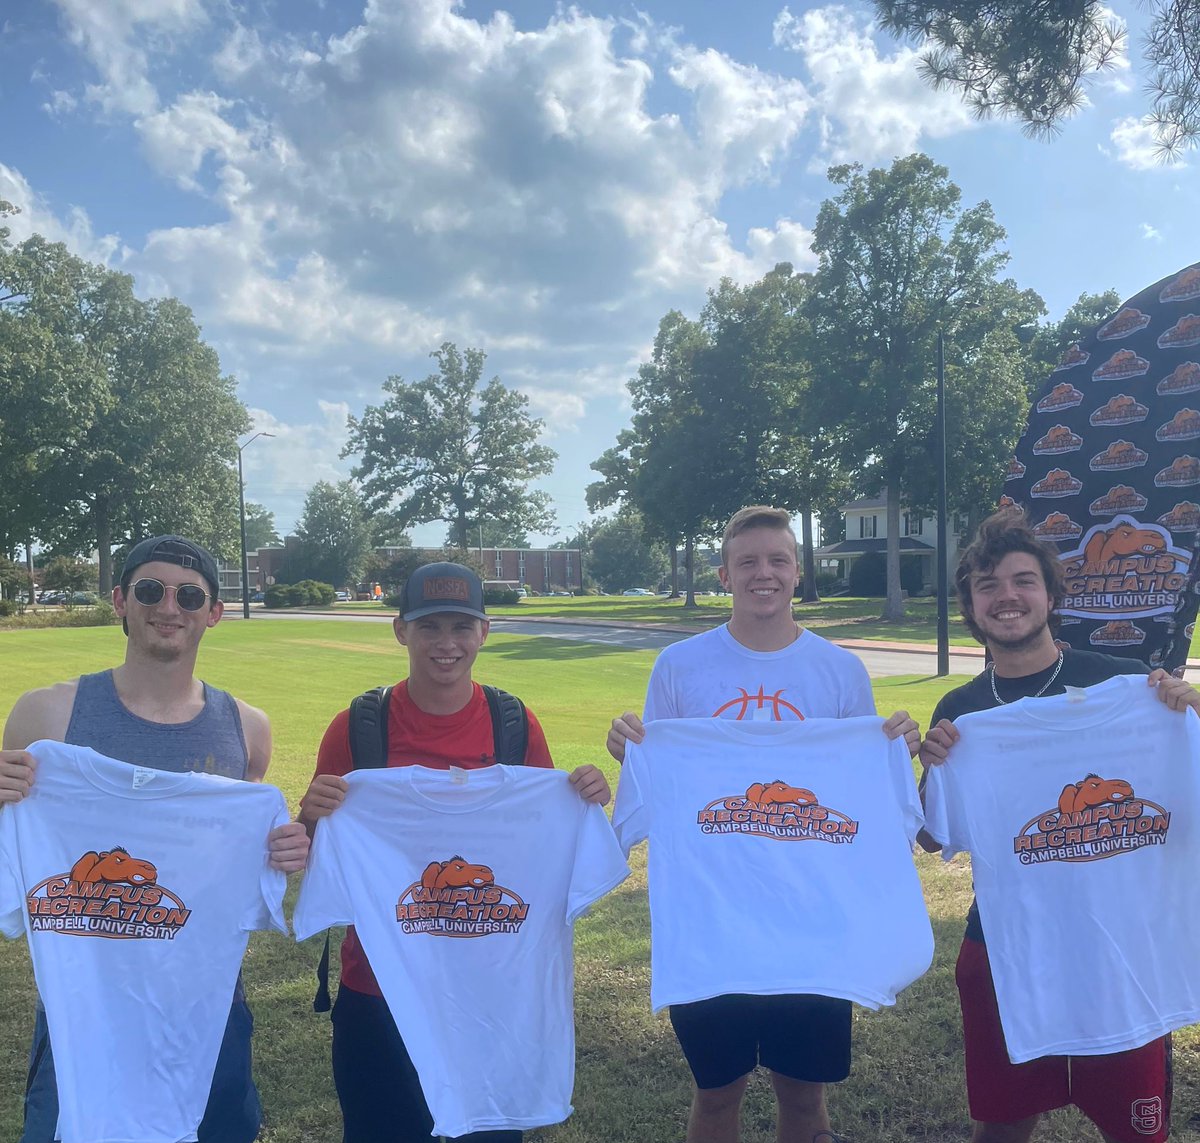 #throwbackthursday to our inaugural Camel Crawl from August 2021! We look forward to seeing you all at the 2nd Annual Camel Crawl this year during welcome week! More details and date coming soon. Fun activities and free shirts, can it get any better?! #campbelluniversity